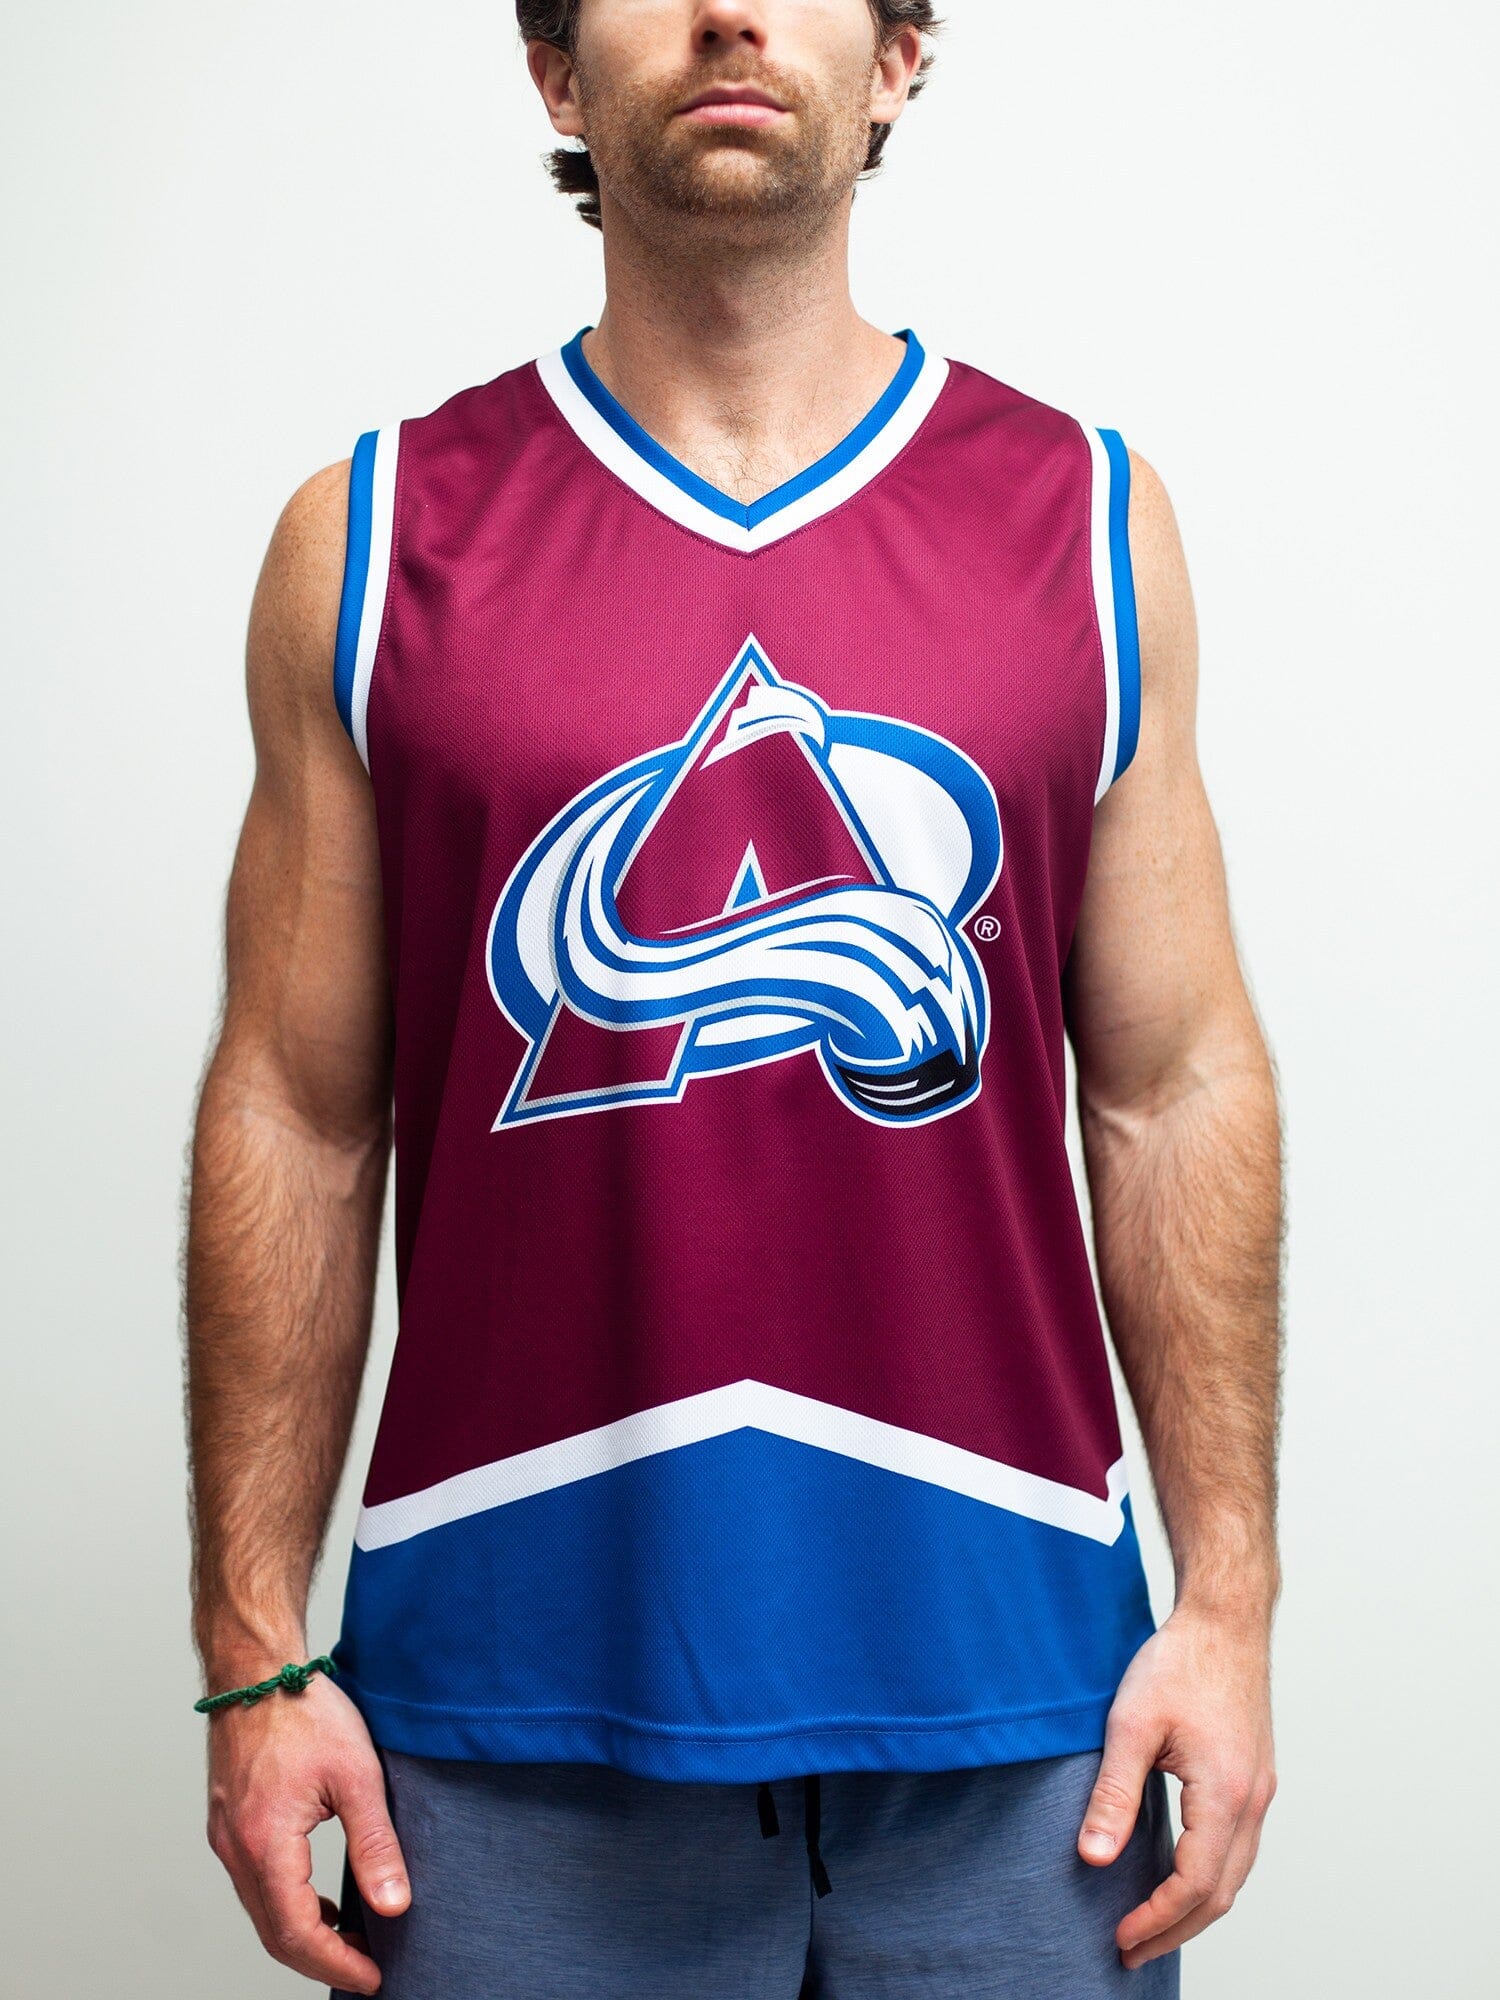 My first Avs sweater : r/ColoradoAvalanche